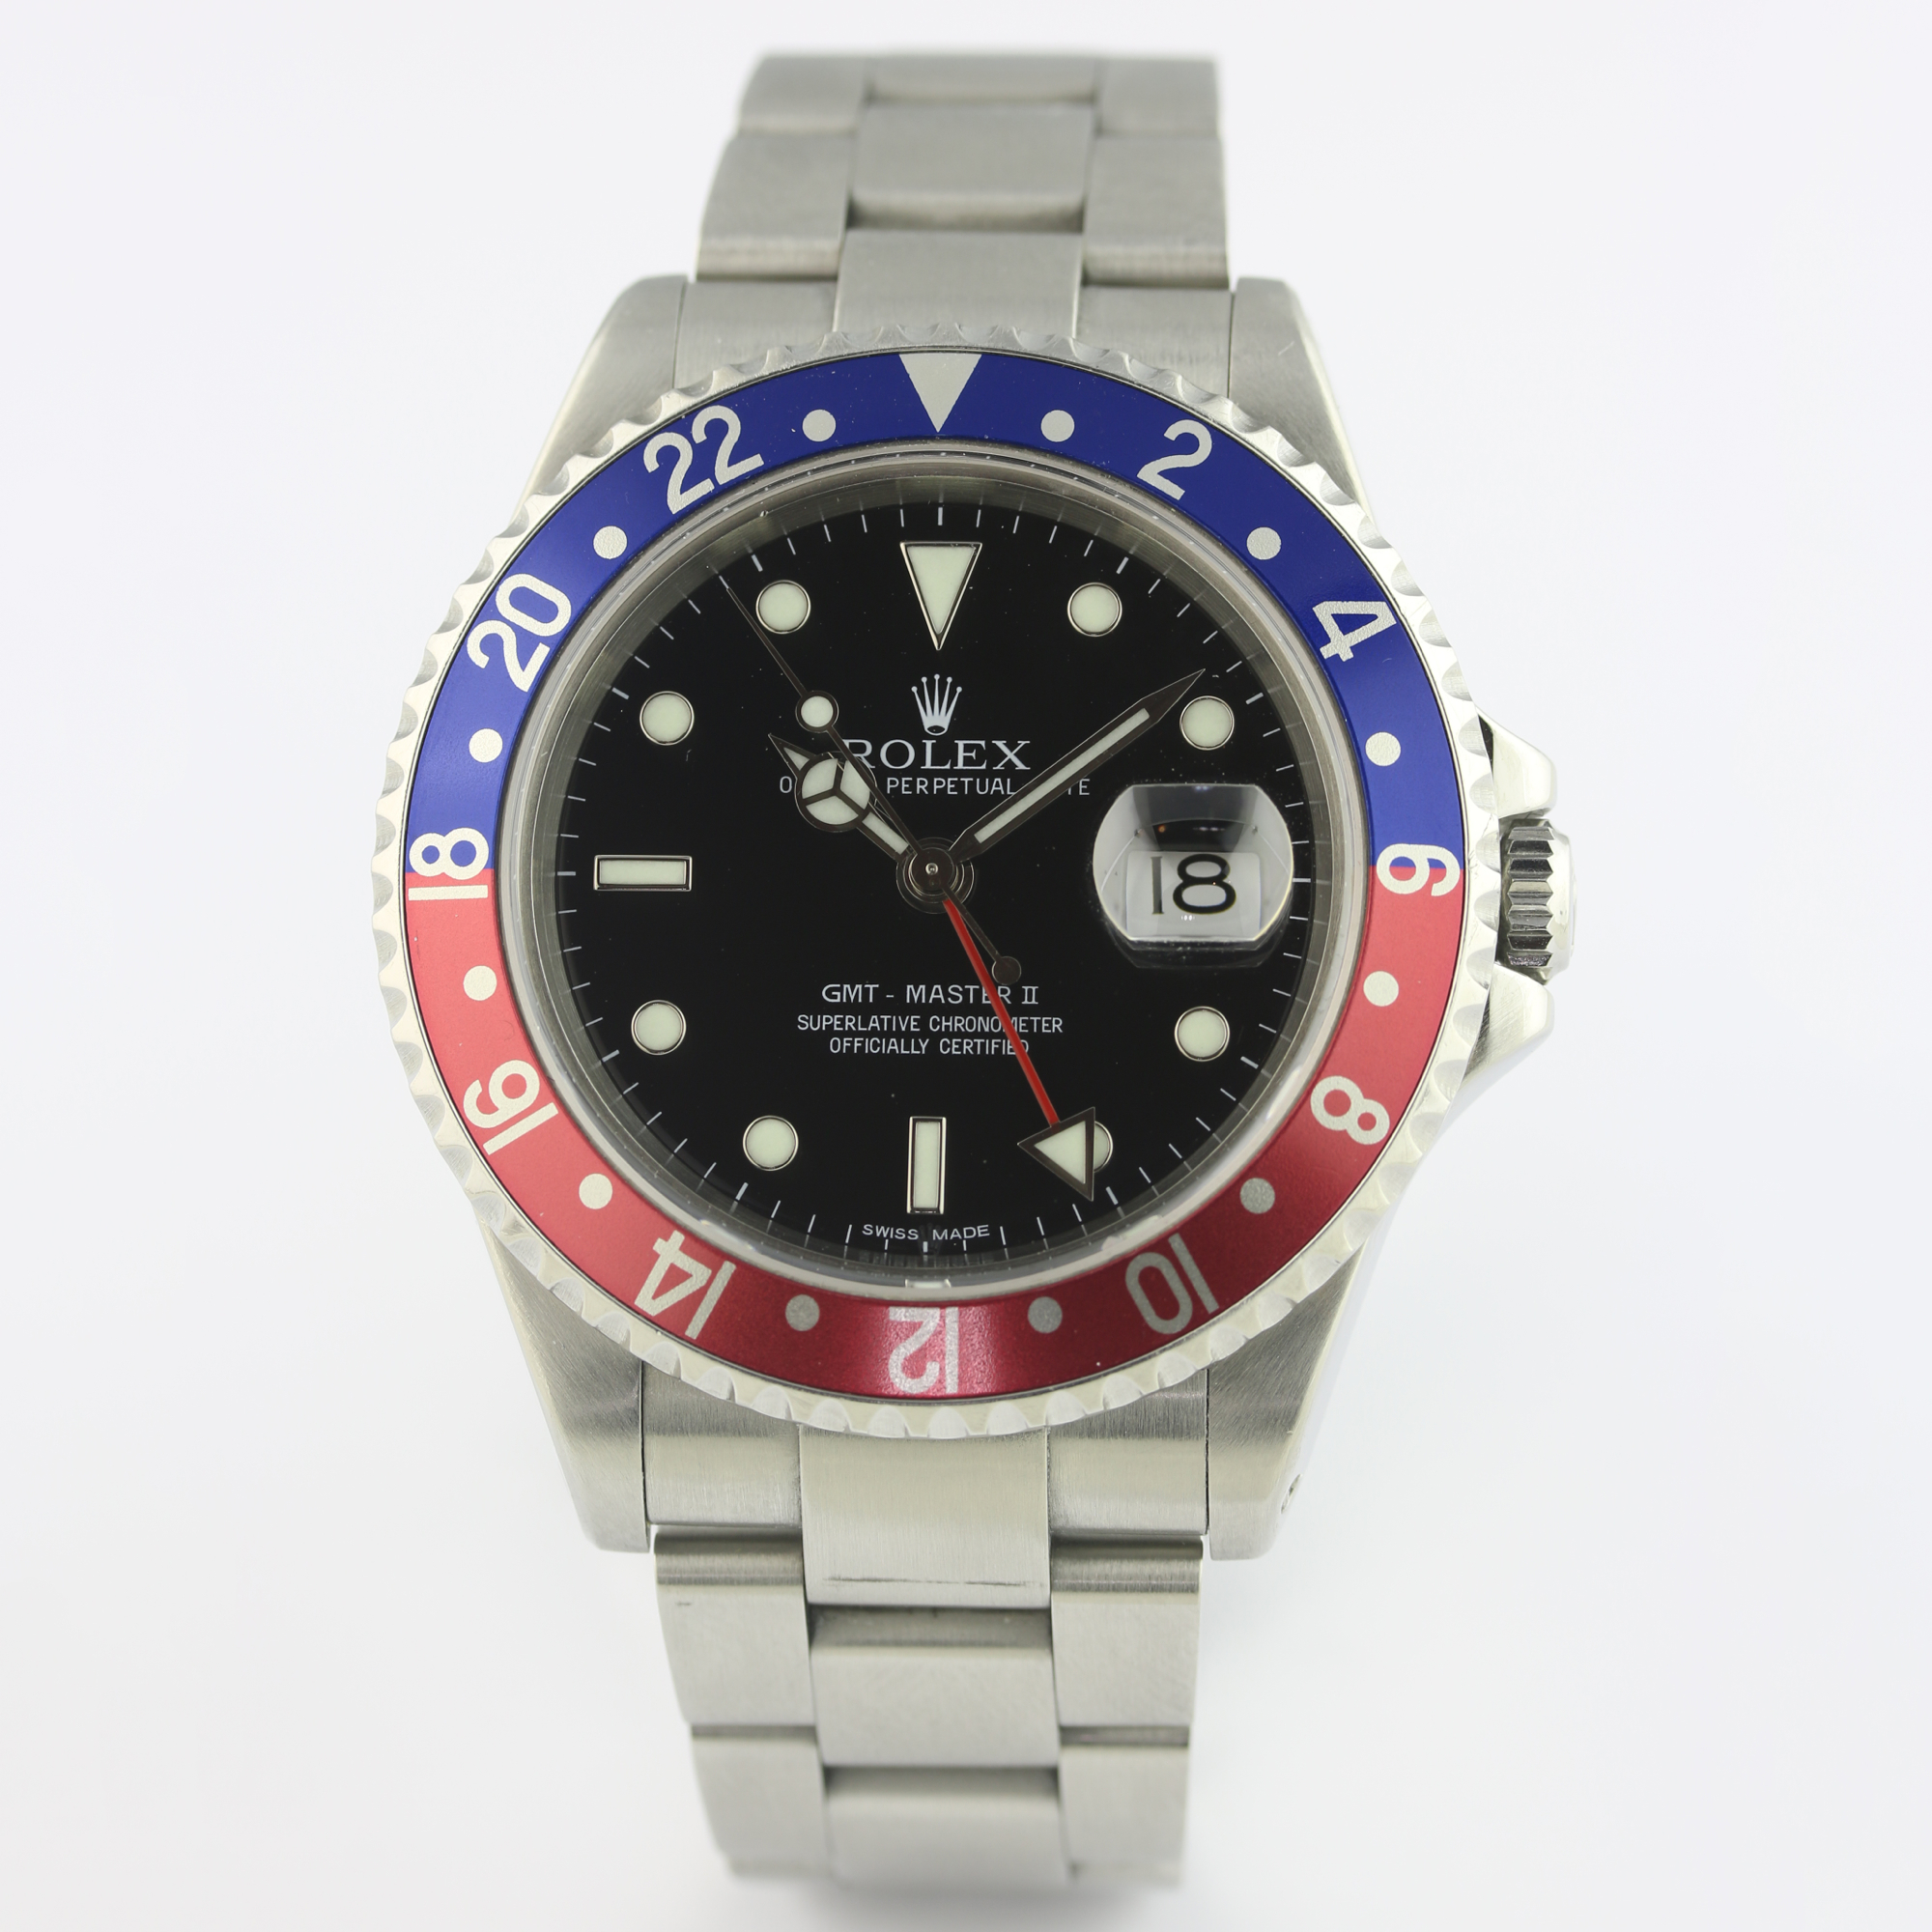 A GENTLEMAN'S STAINLESS STEEL ROLEX OYSTER PERPETUAL DATE GMT MASTER II BRACELET WATCH DATED 2000, - Image 3 of 7